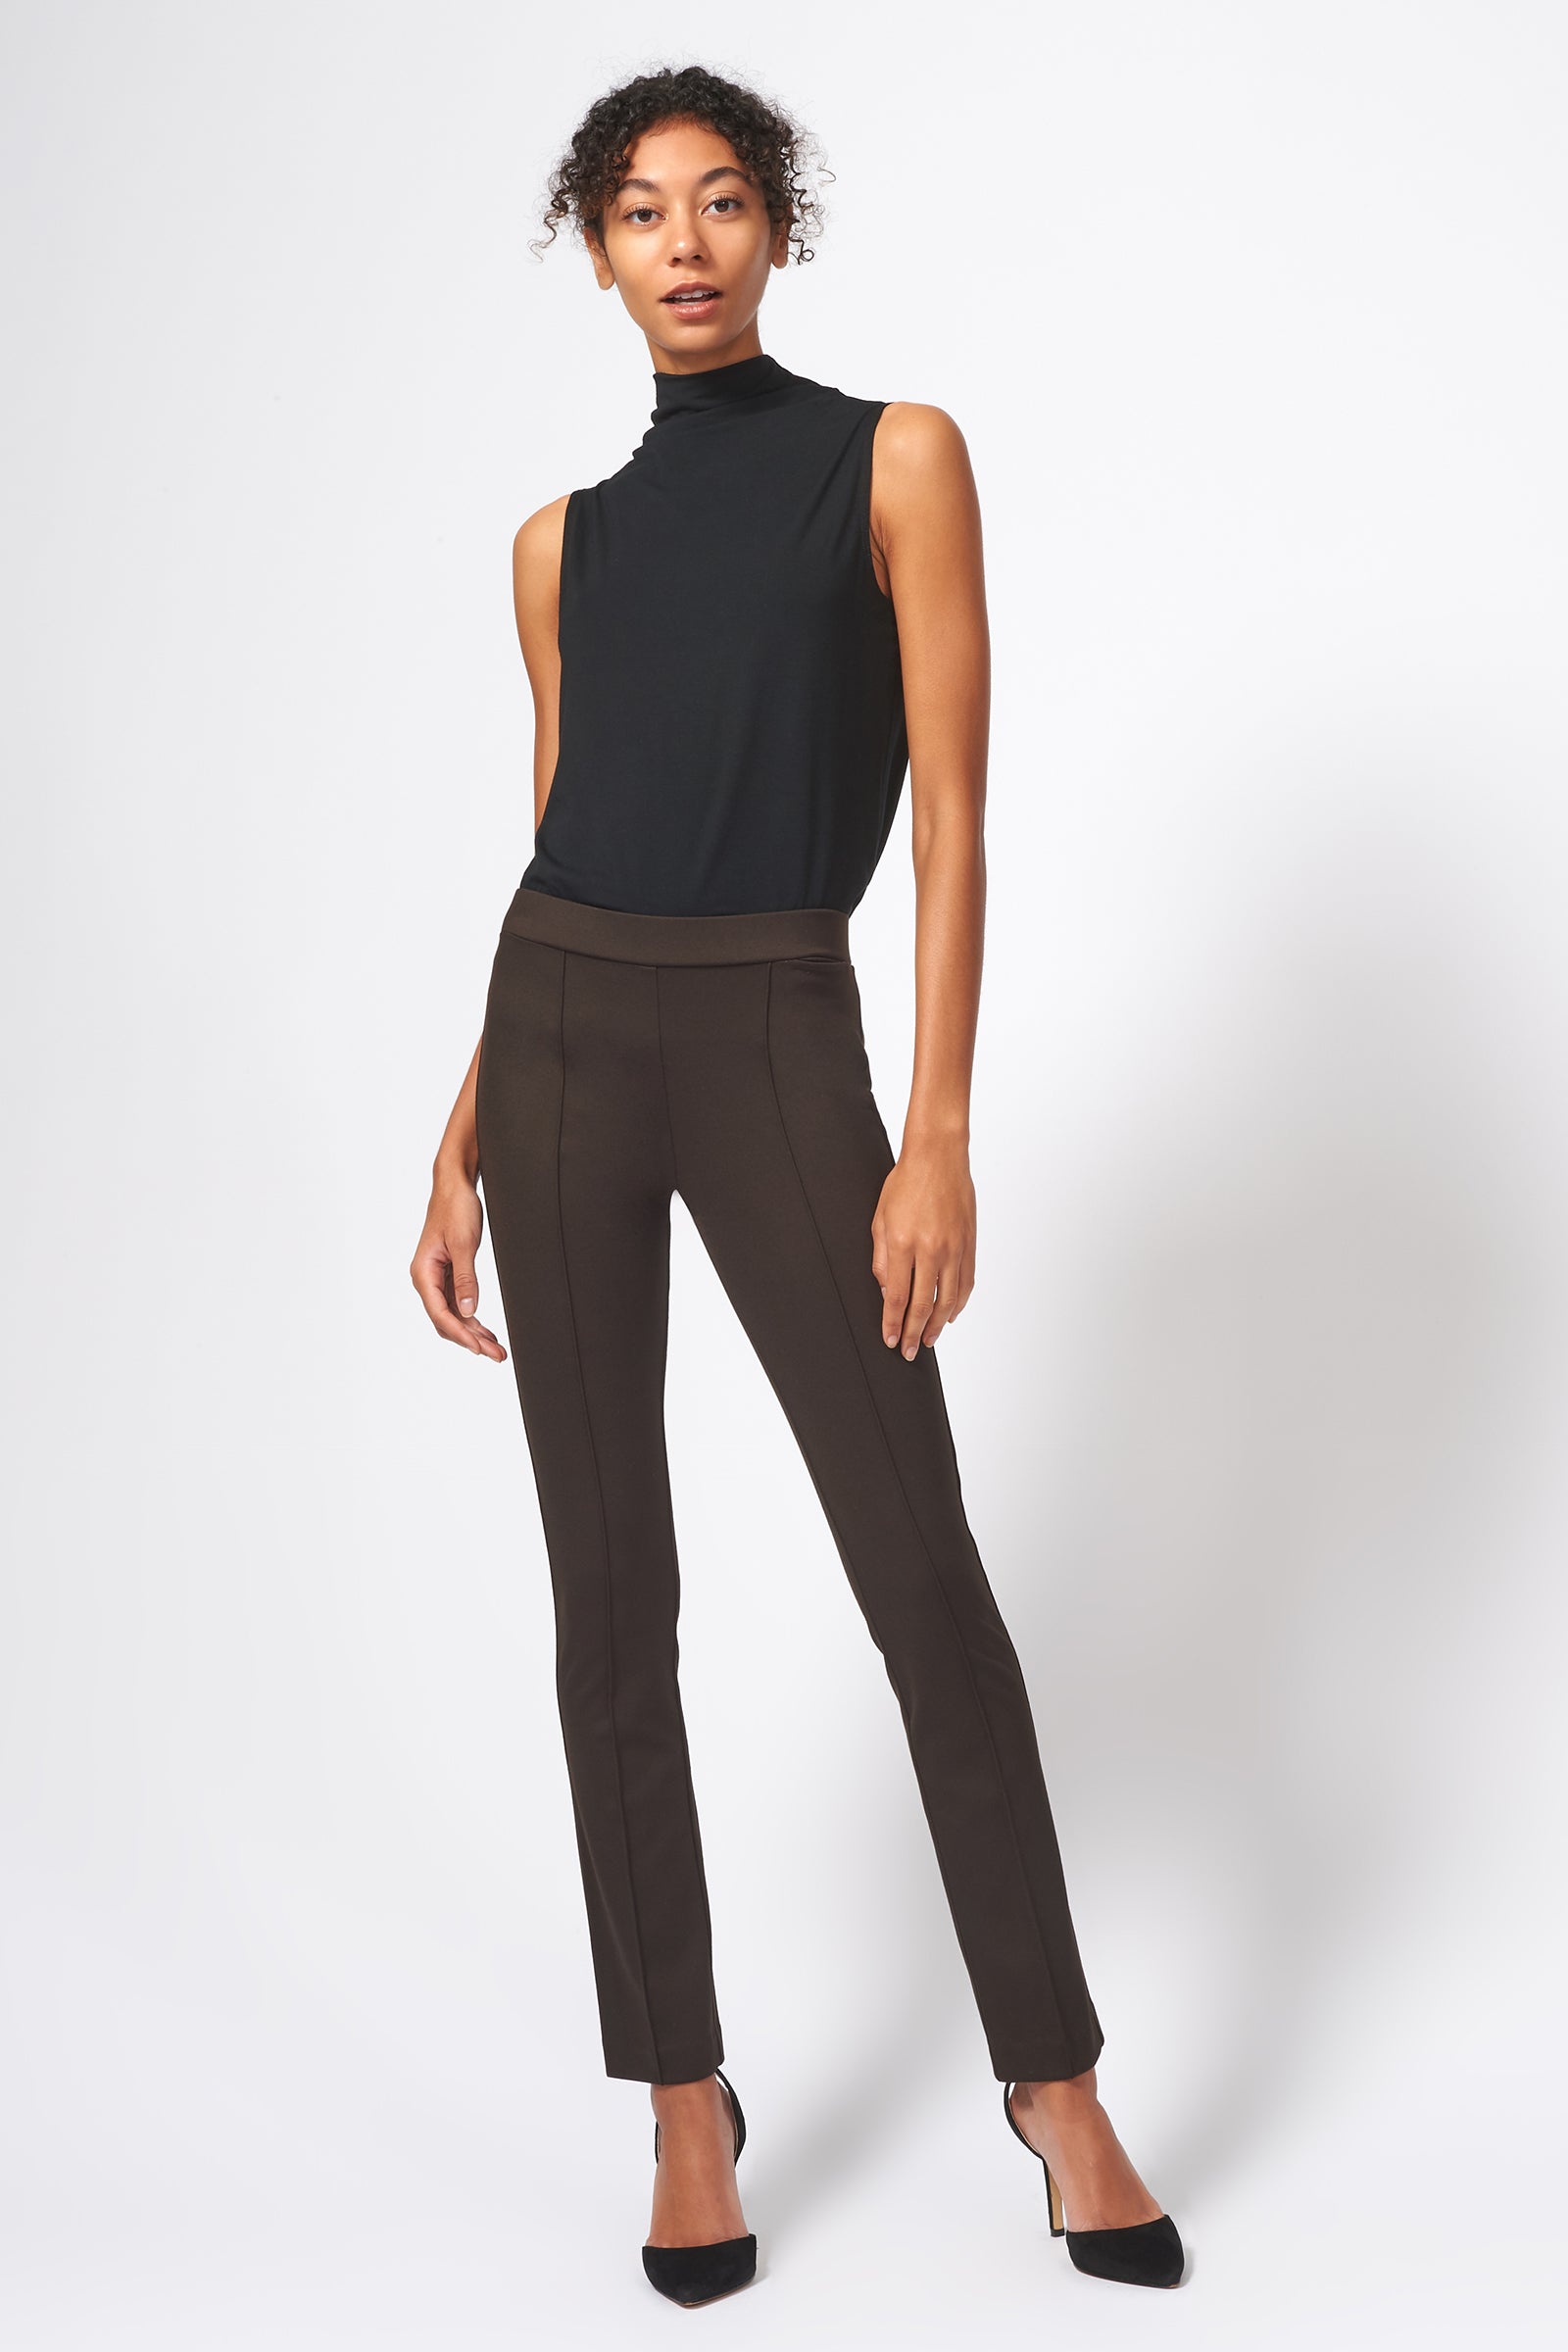 Kal Rieman Pintuck Ponte Straight Leg Pant in Espresso on Model Full Front View